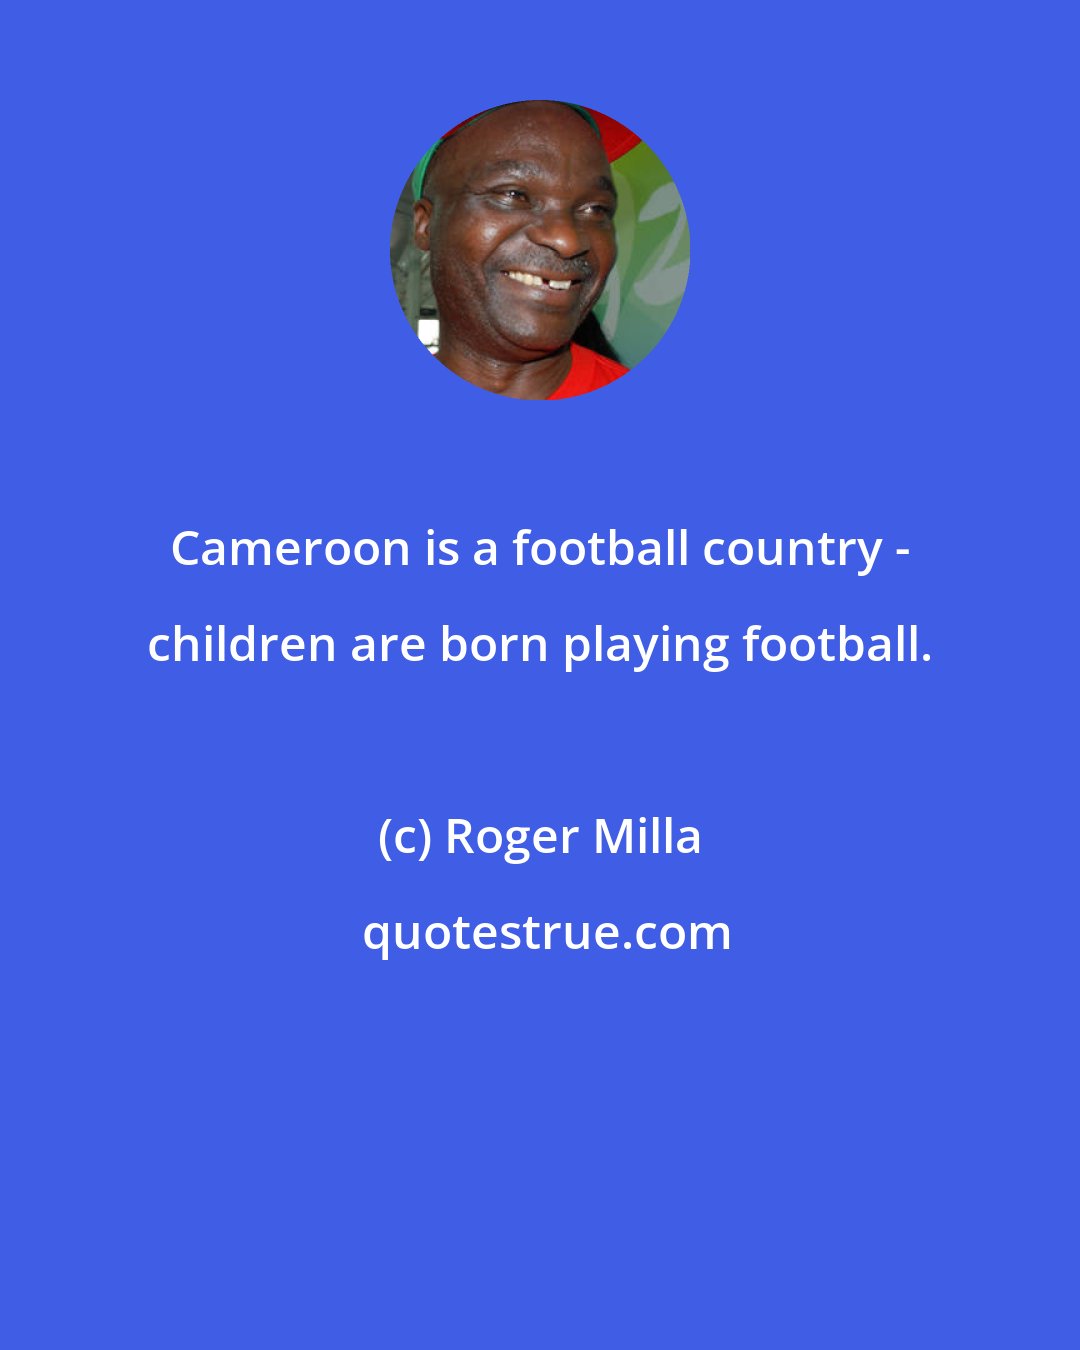 Roger Milla: Cameroon is a football country - children are born playing football.